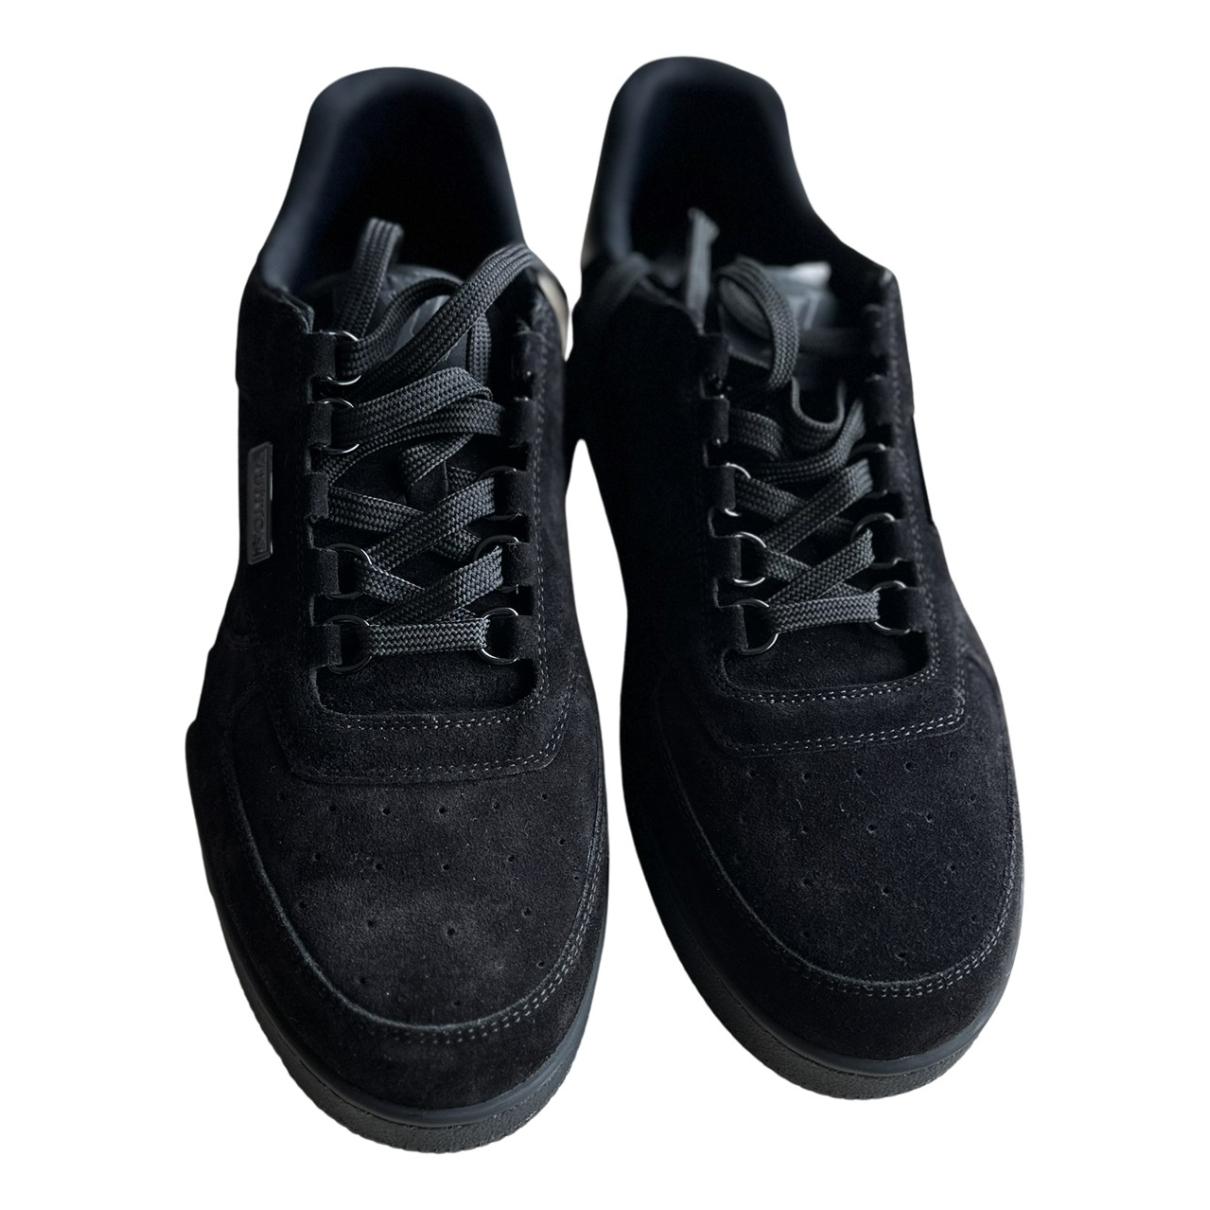 Lv trainer low trainers Louis Vuitton Black size 9.5 US in Suede - 29722187